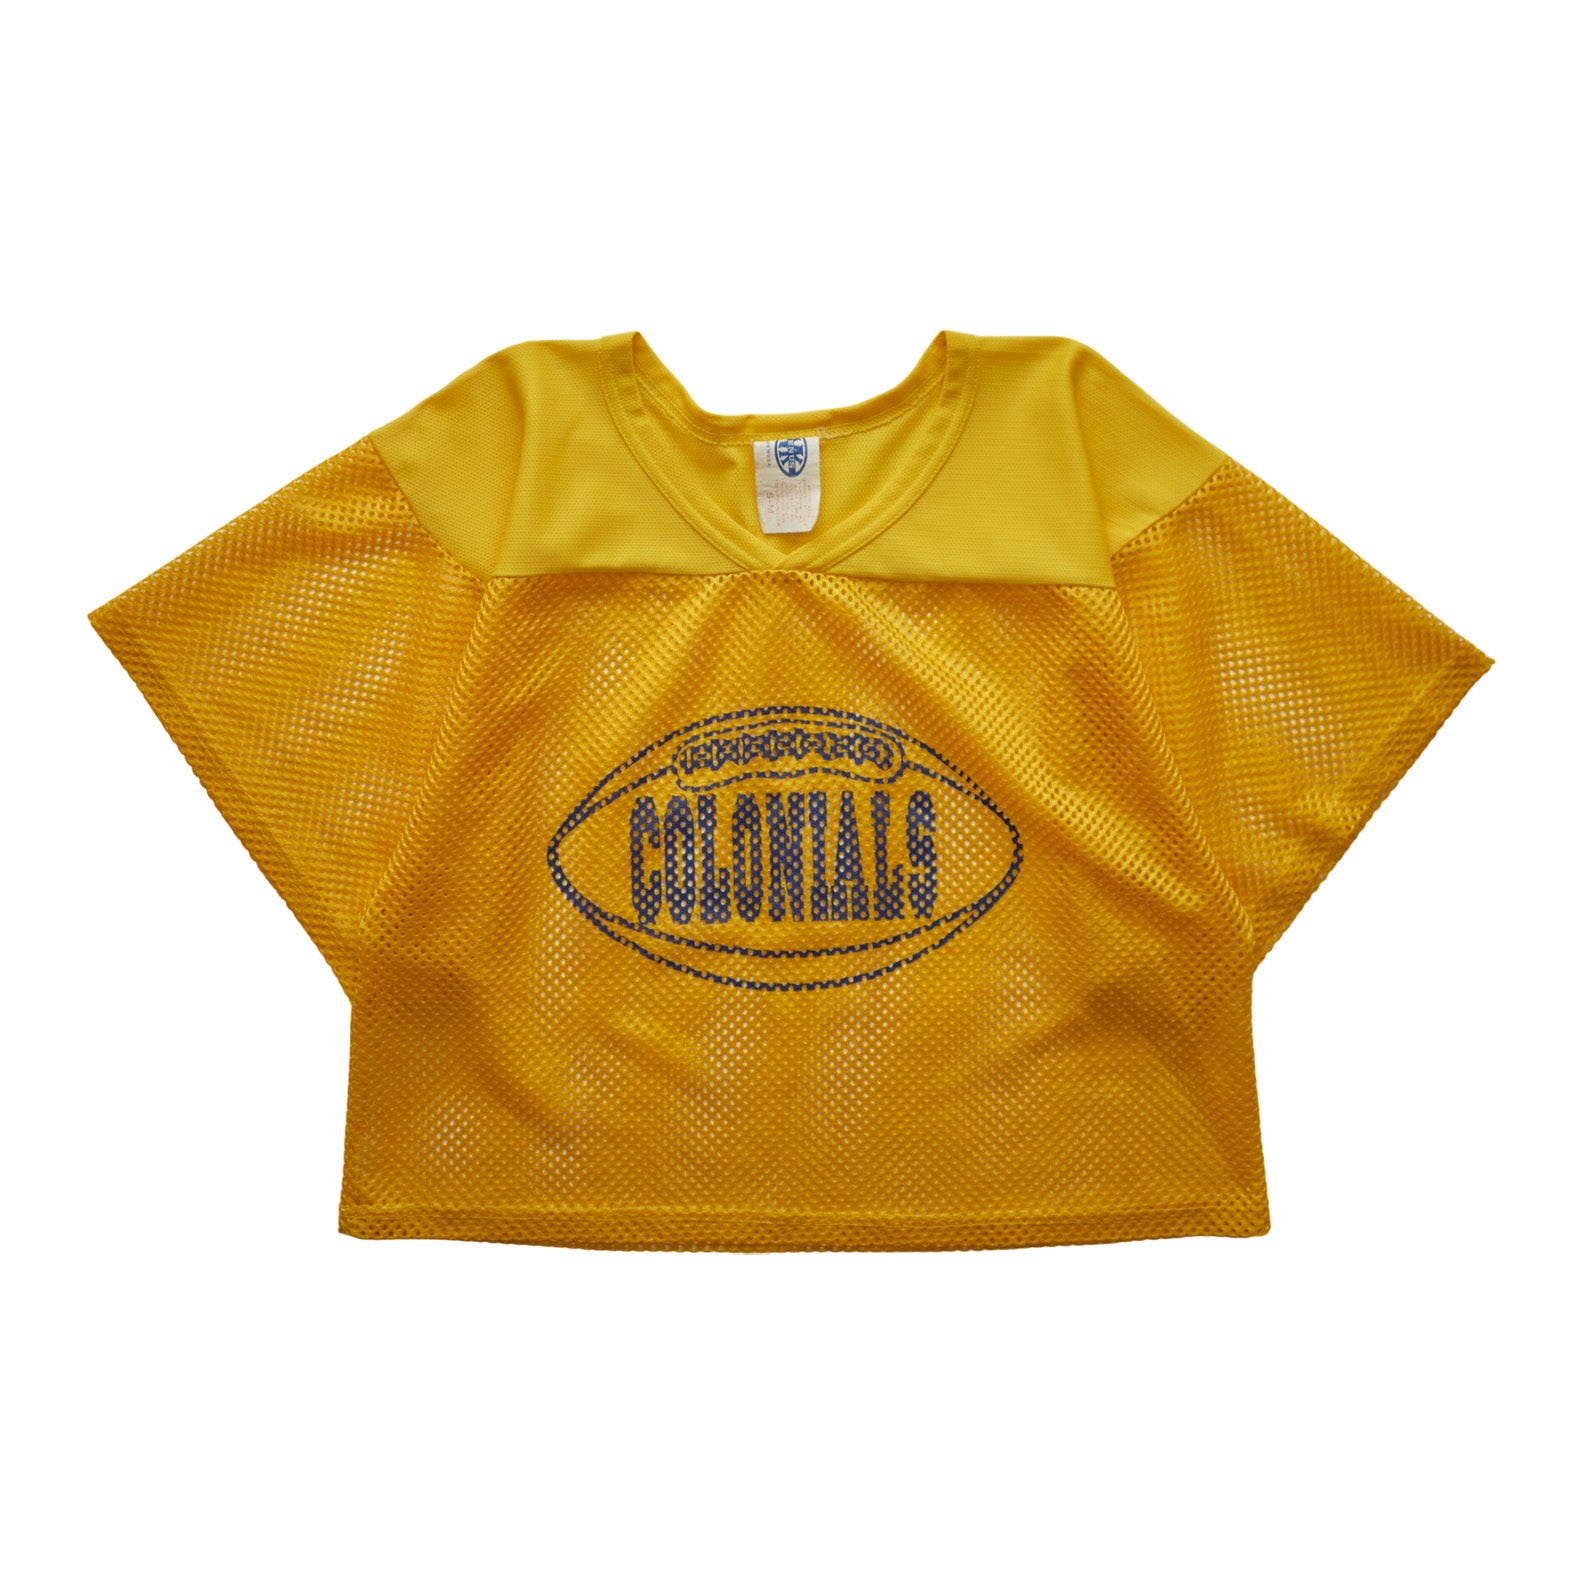 (S/M) 00s Colonials Mesh Jersey